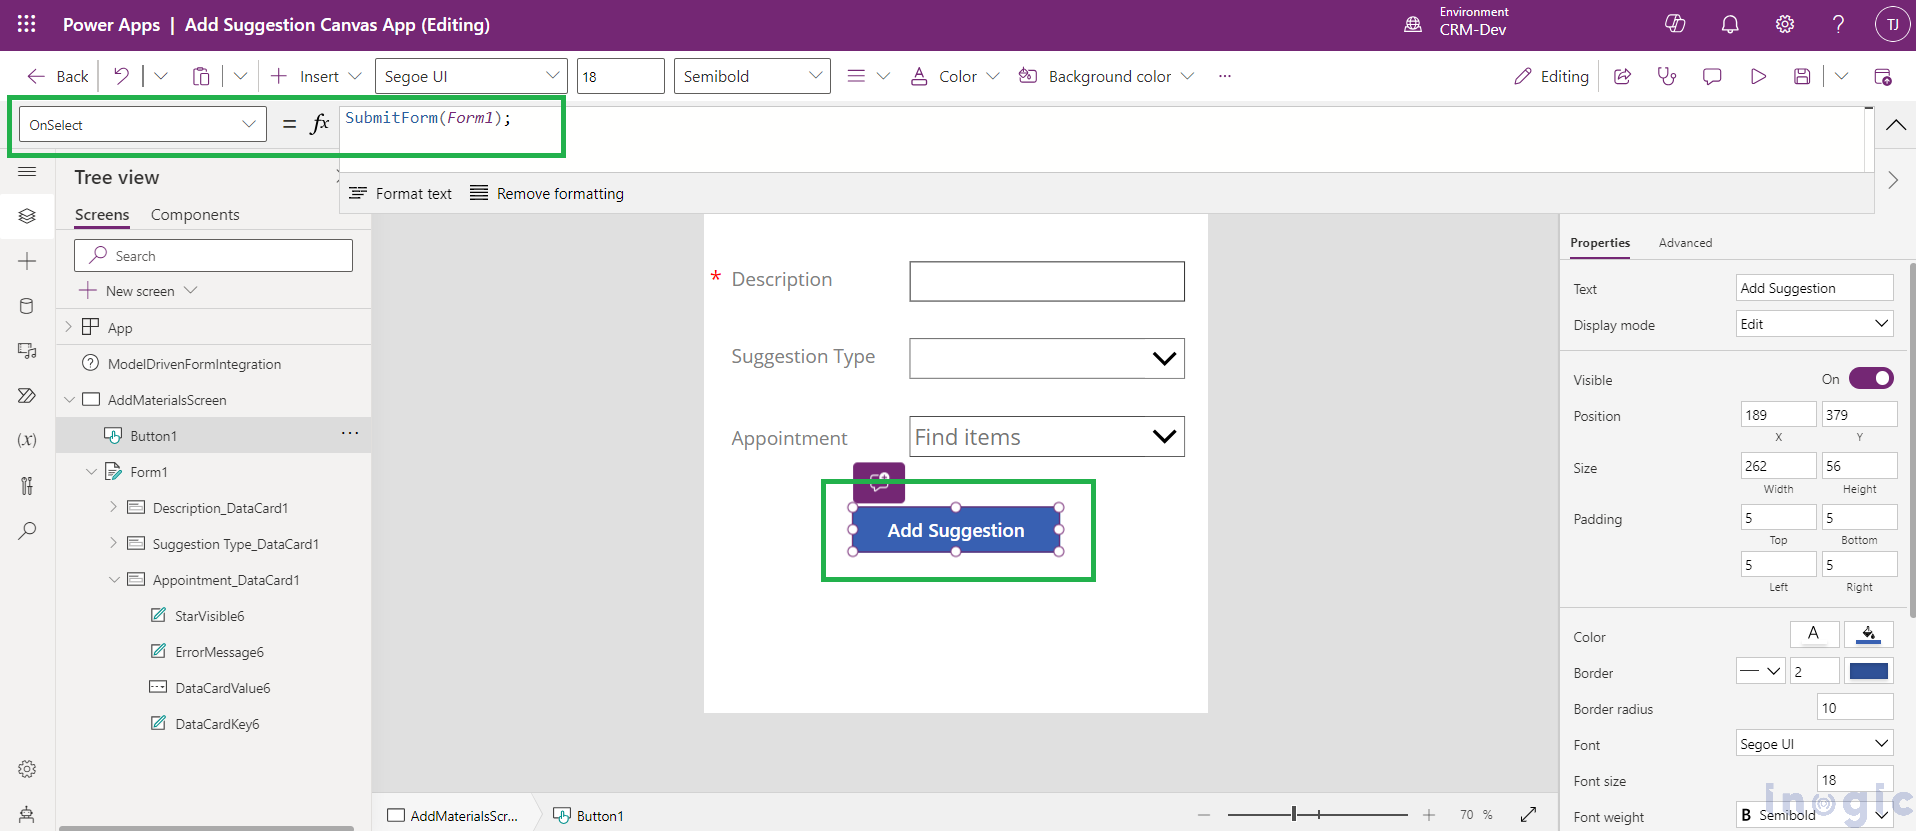 Refresh Dynamics 365 CRM Subgrid from Embedded Canvas App